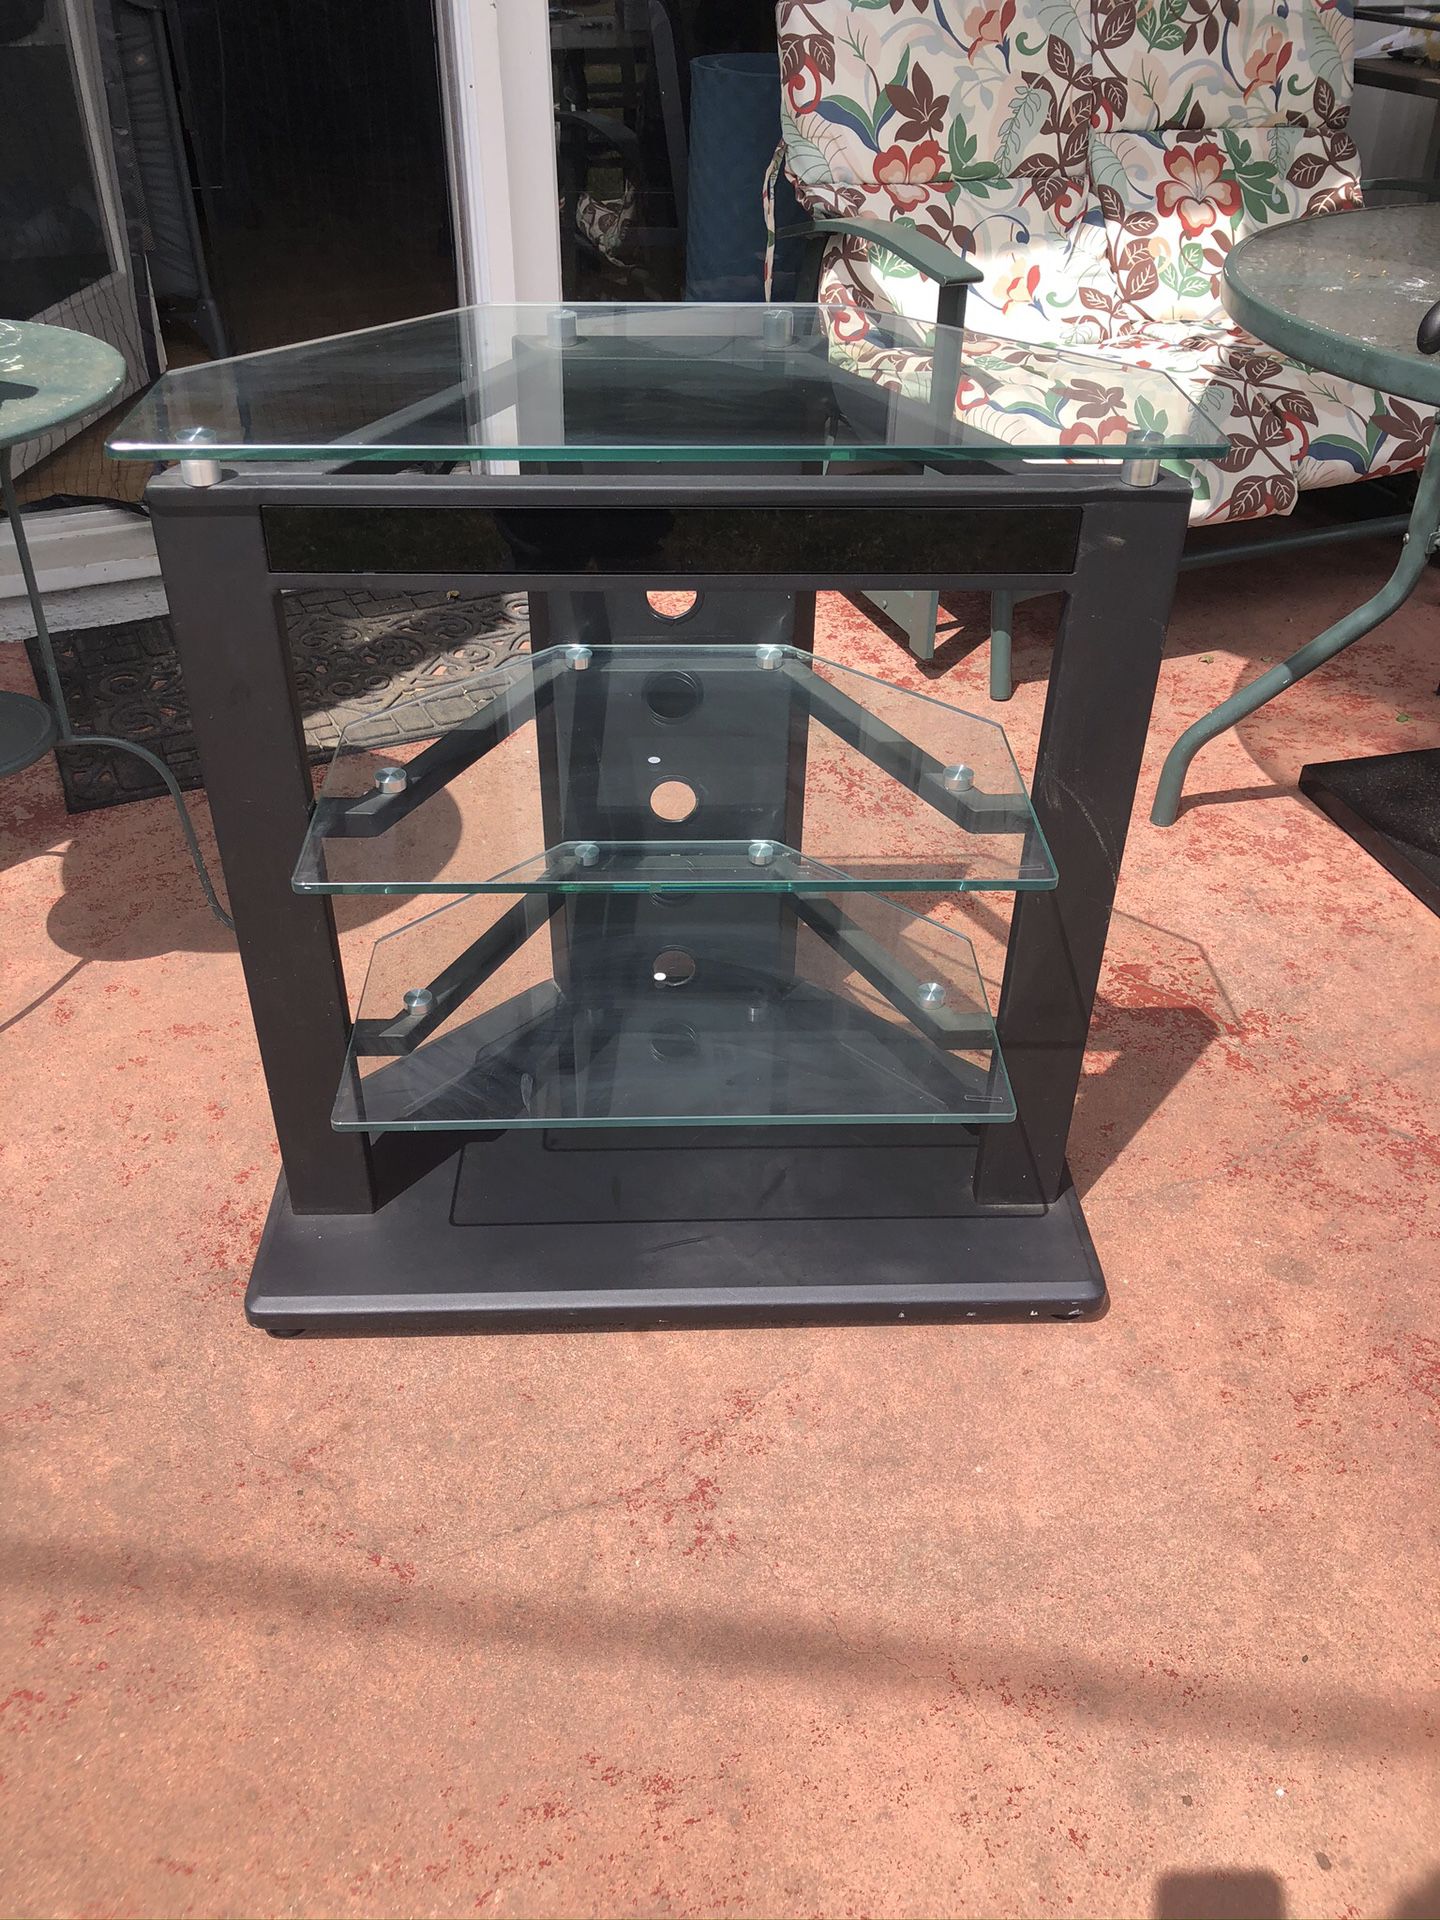 Really nice tv media stand. In excellent condition. Really well made. Sturdy metal frame and heavy glass. Really really nice